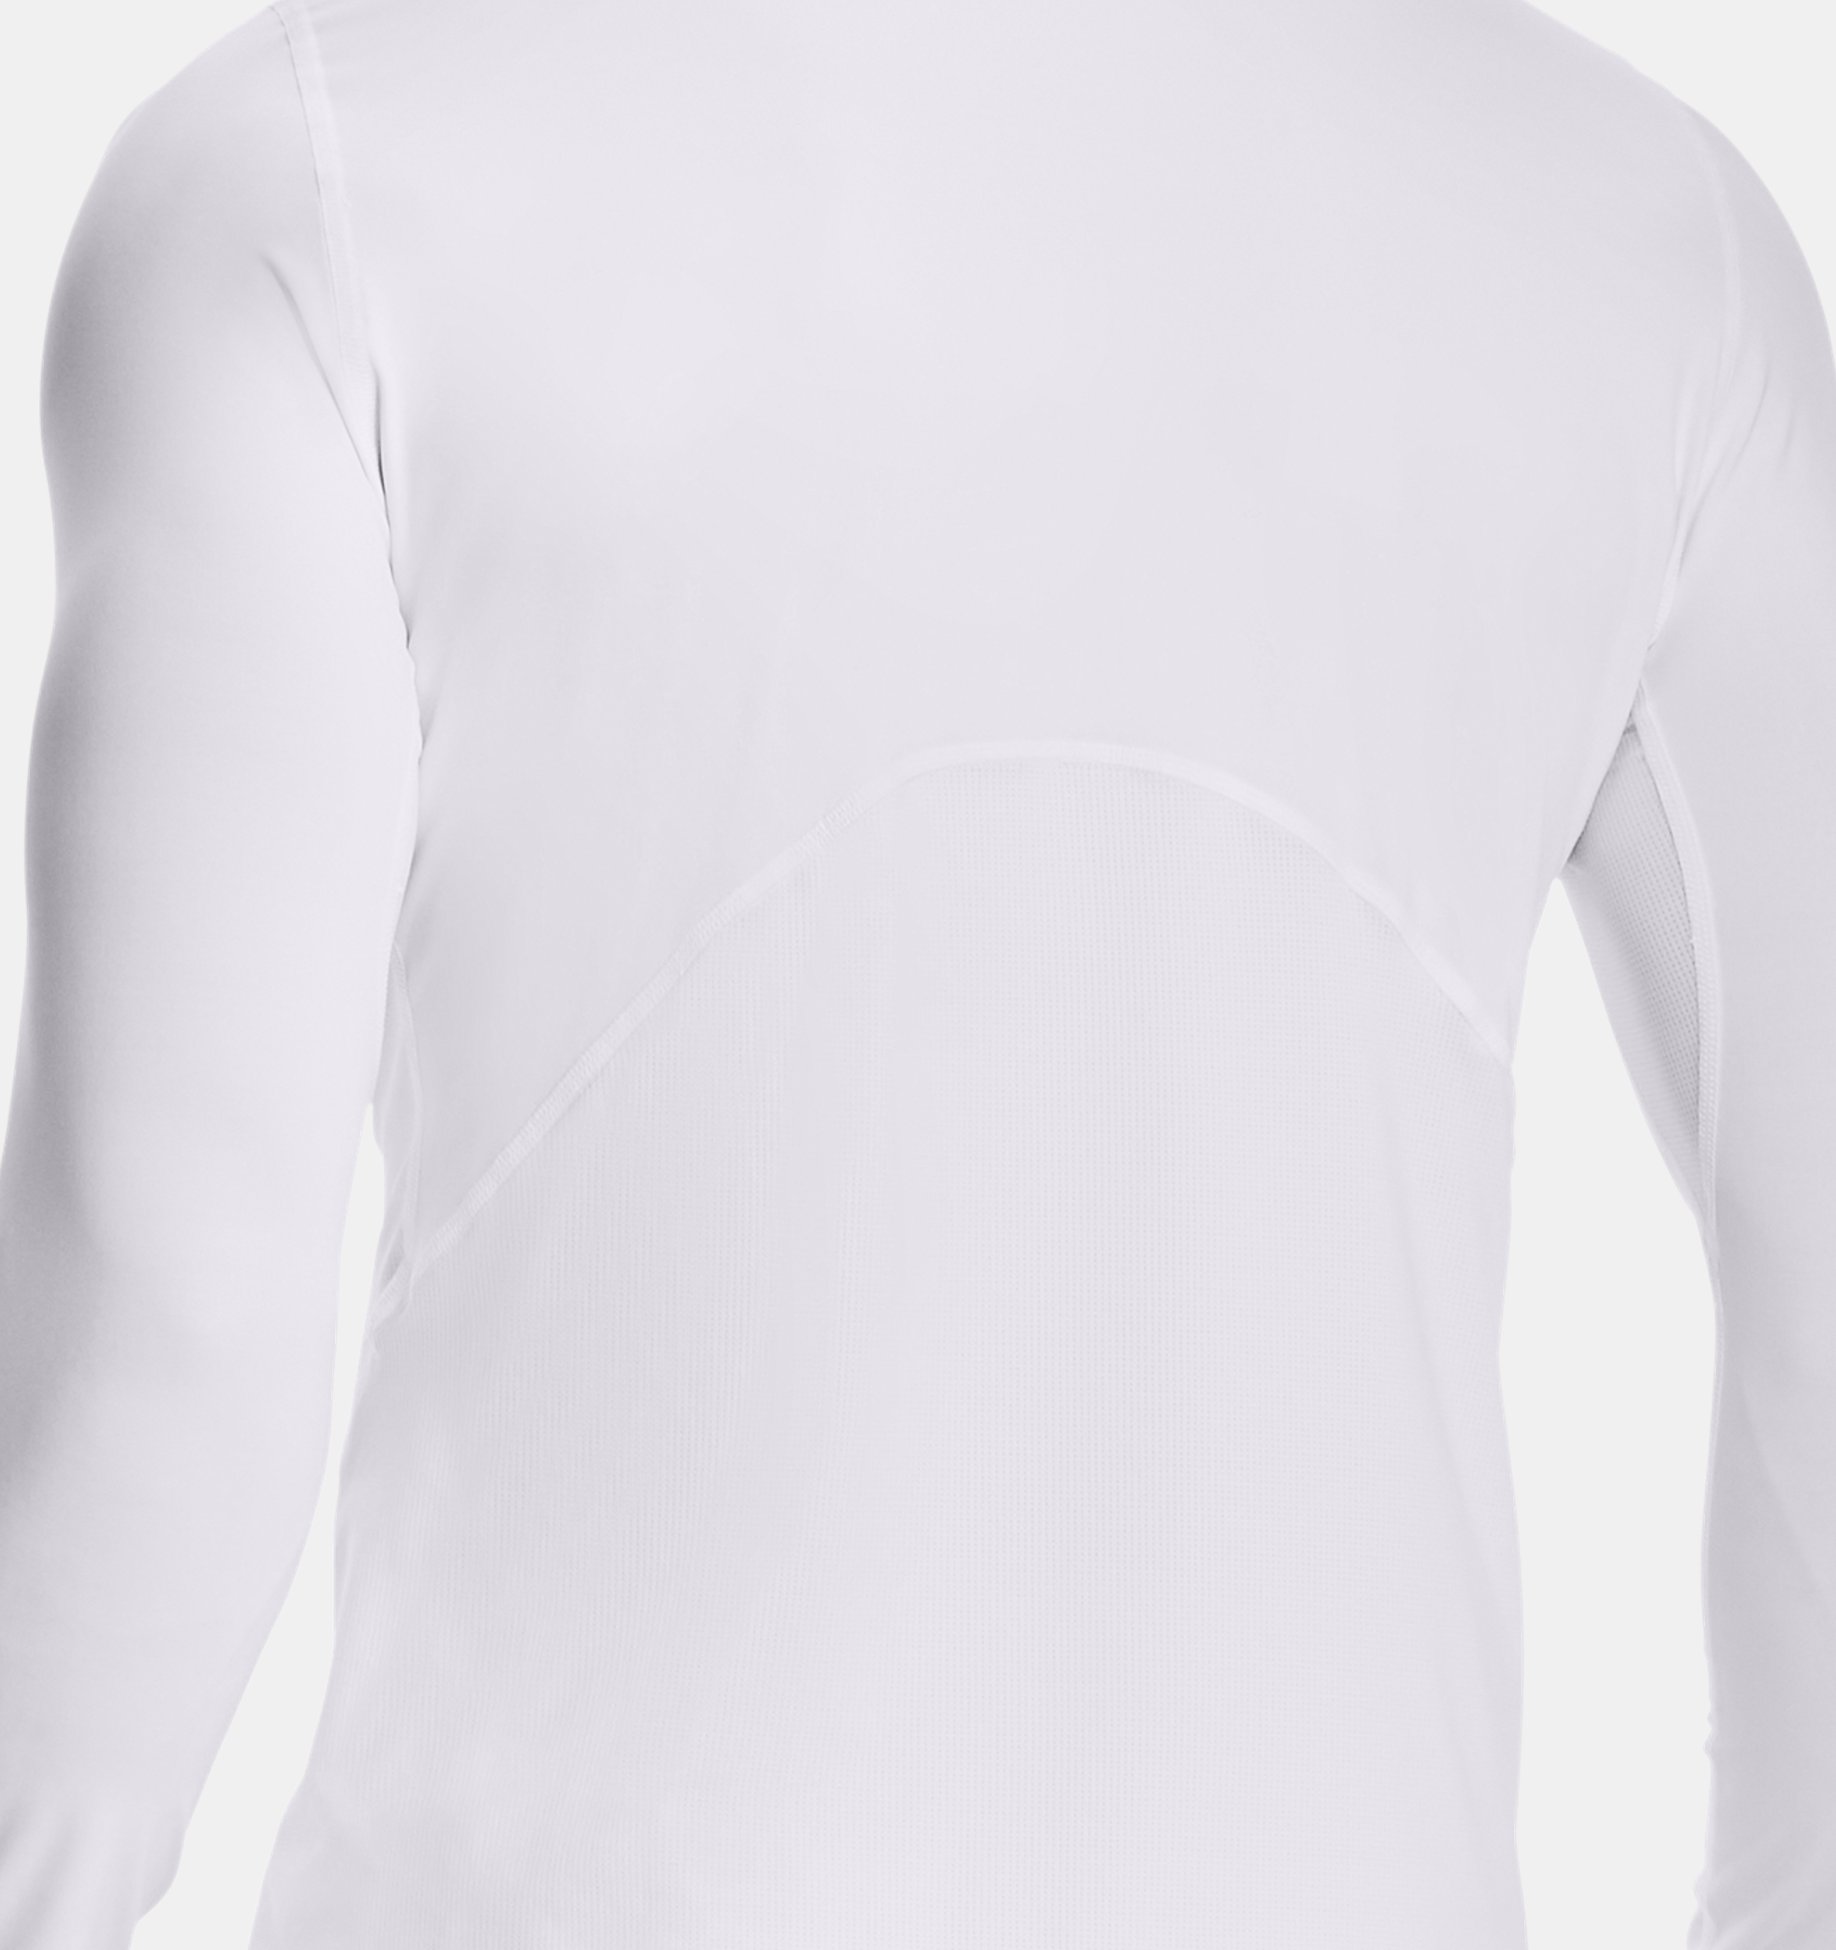 Men's Fitted Long Sleeve | Under Armour